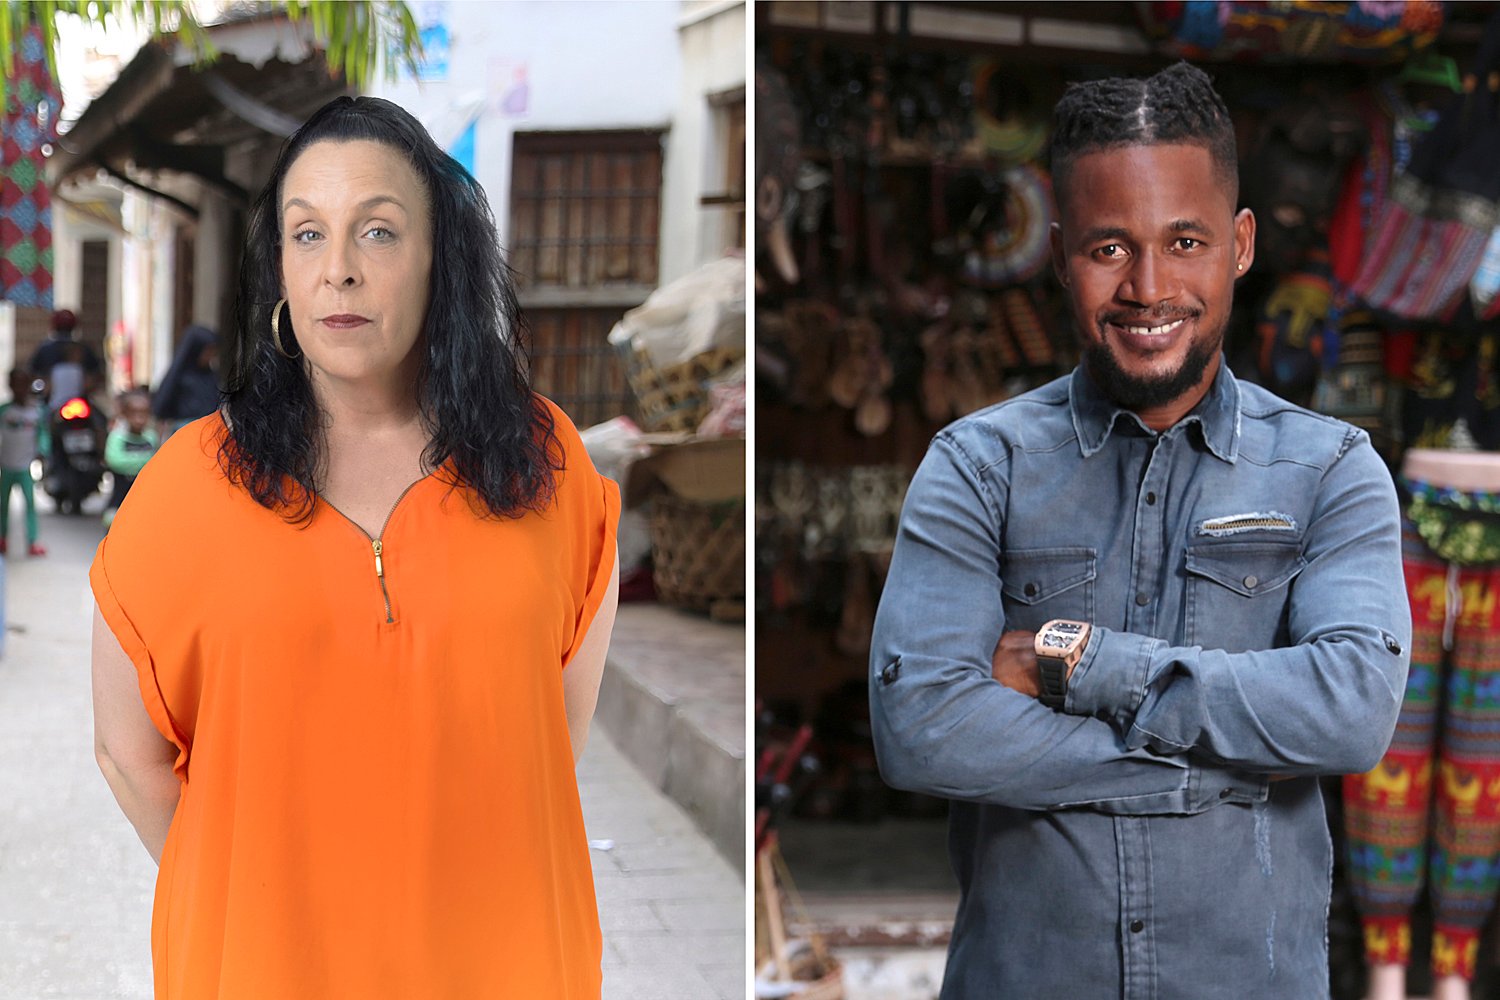 Before the 90 Days Season 5 stars Kimberly, seen here in a bright orange shirt, and Usman, who is wearing a denim button down